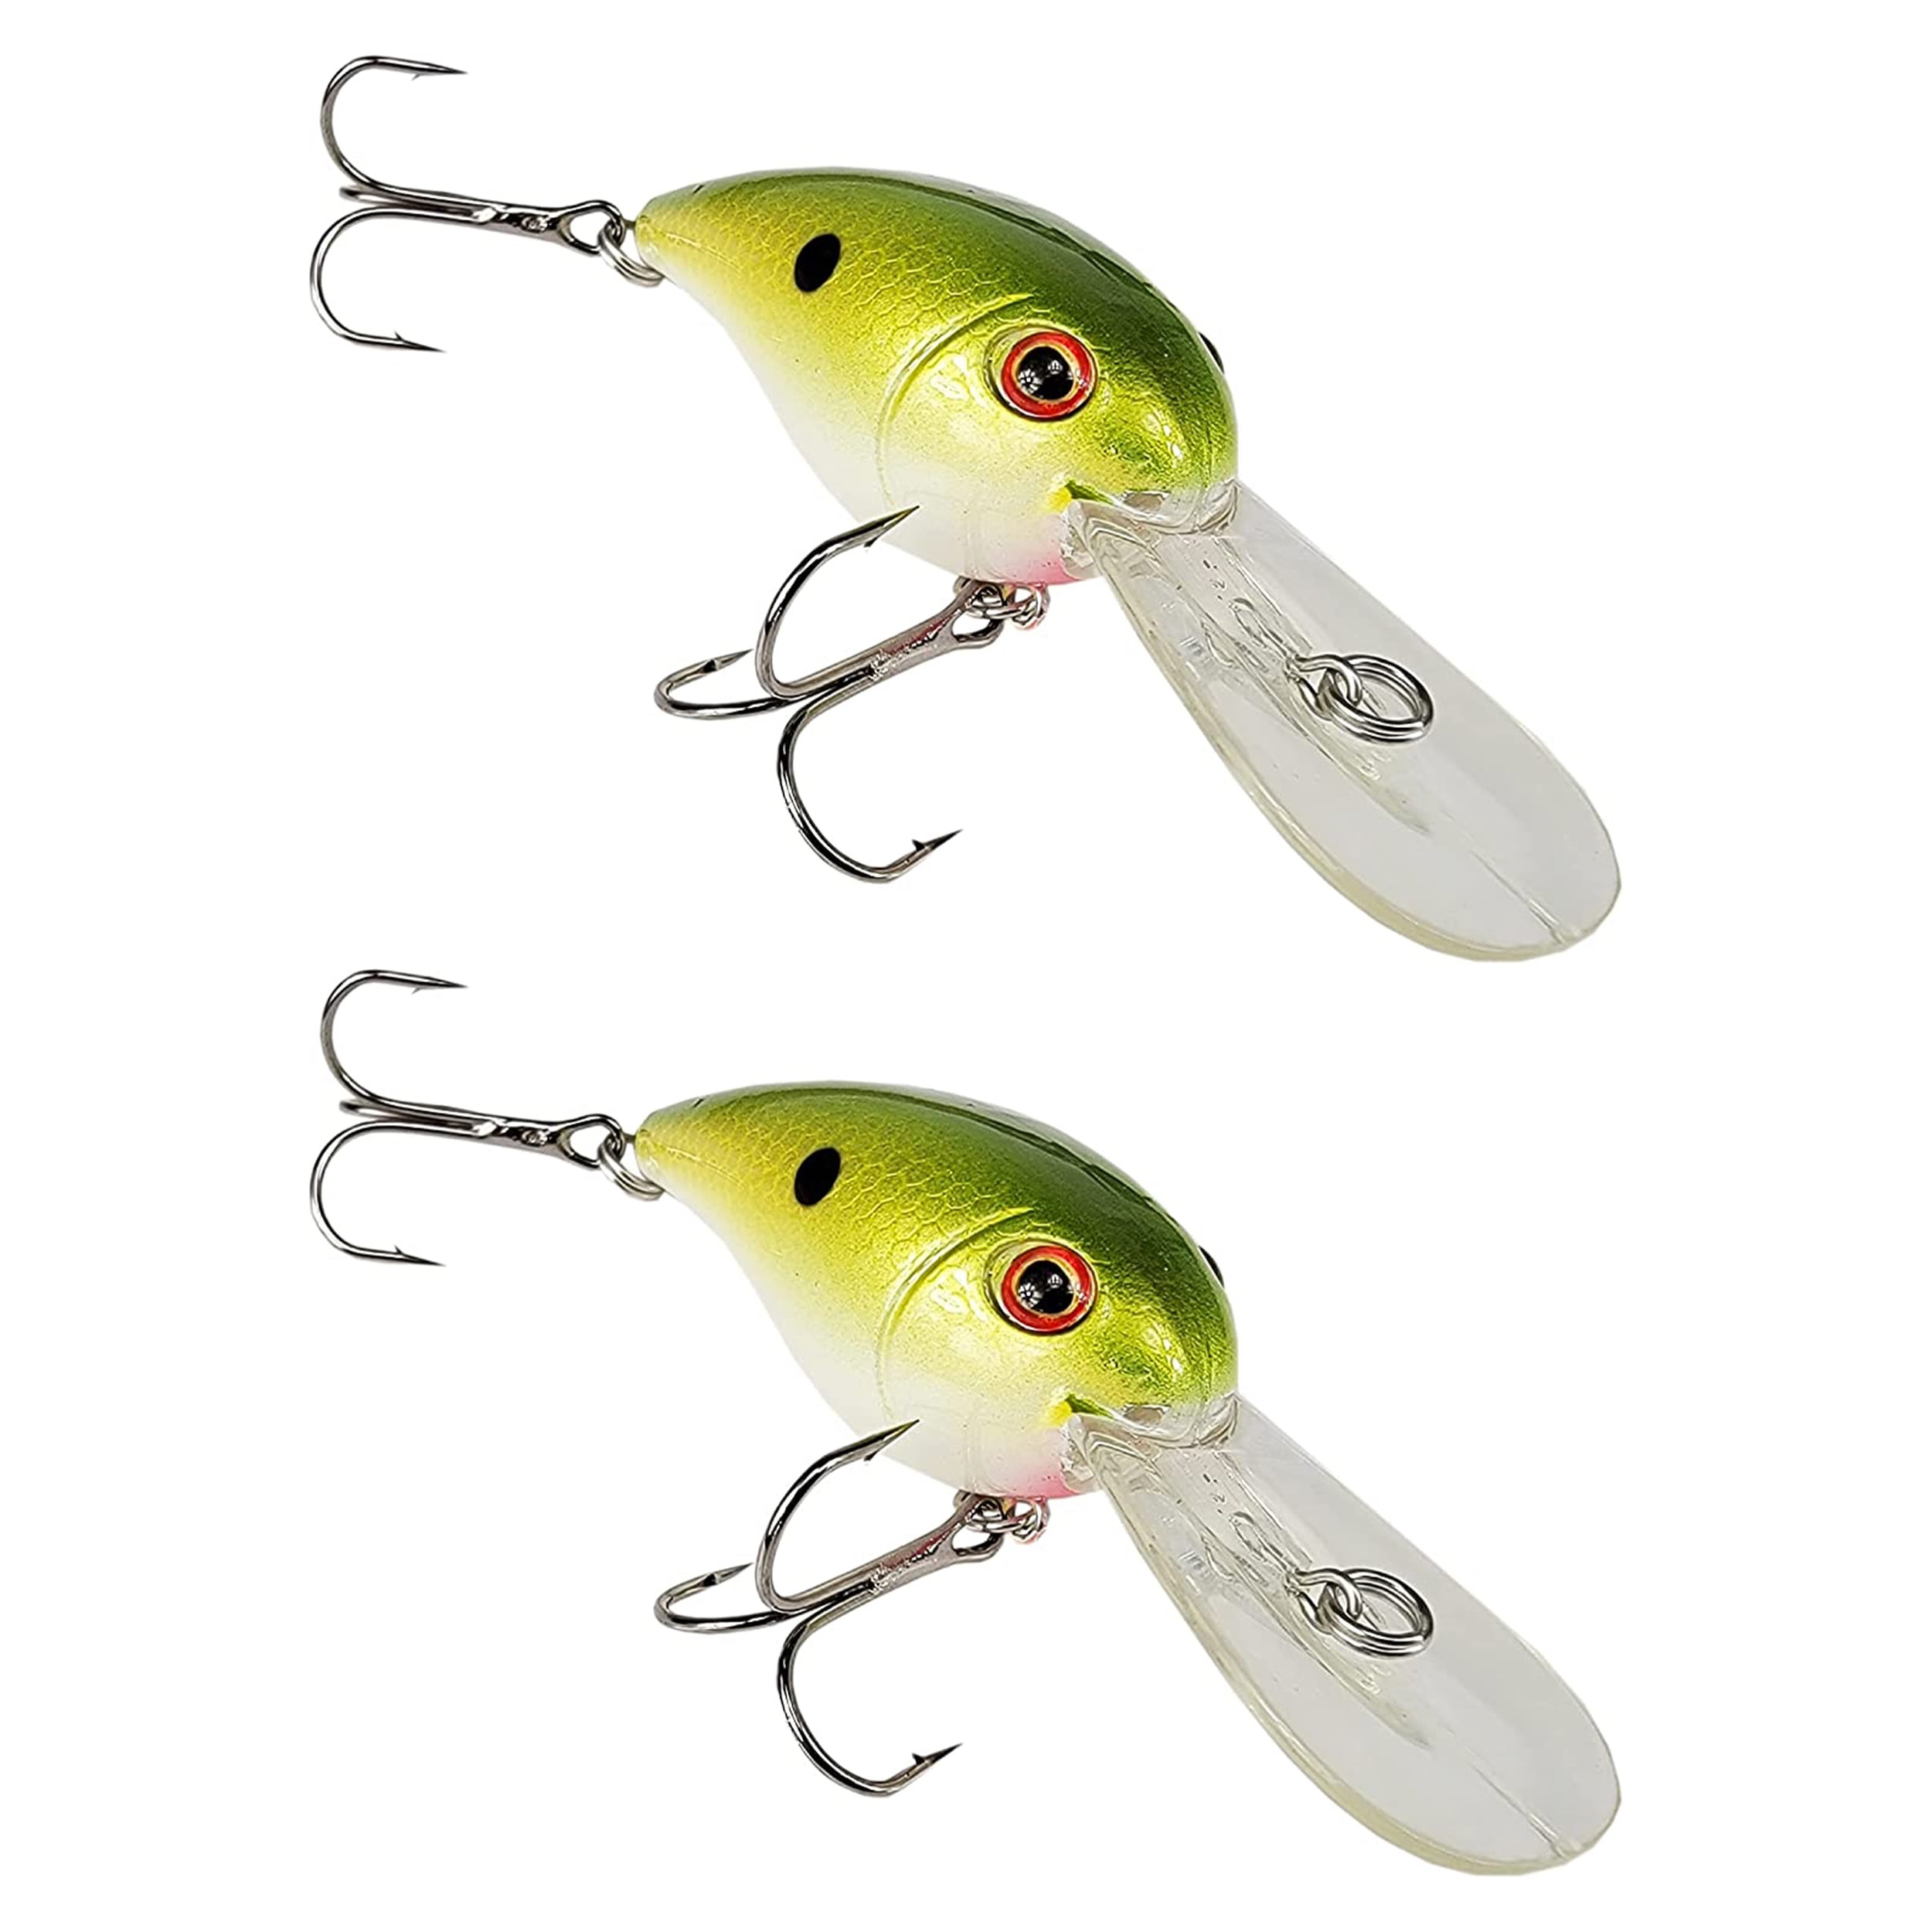 Tackle HD 2-Pack Crankhead Crankbait, Fishing Bait with 9 to 14 Feet Depth,  Fishing Lures for Freshwater or Saltwater, Hard Swimbaits for Bass